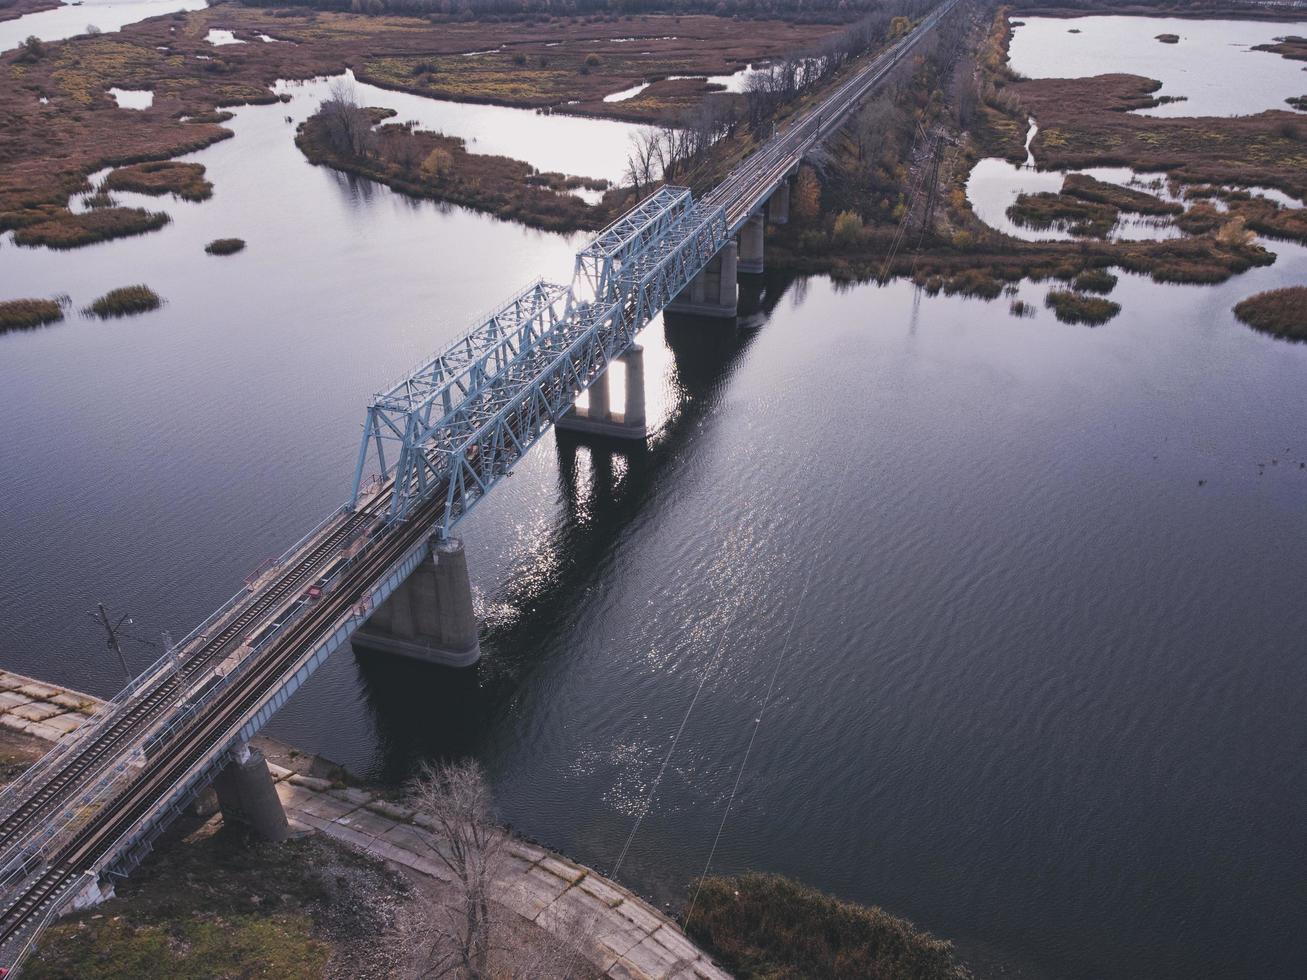 Aerial view of a body of water with a metal railway bridge on a concrete base. photo